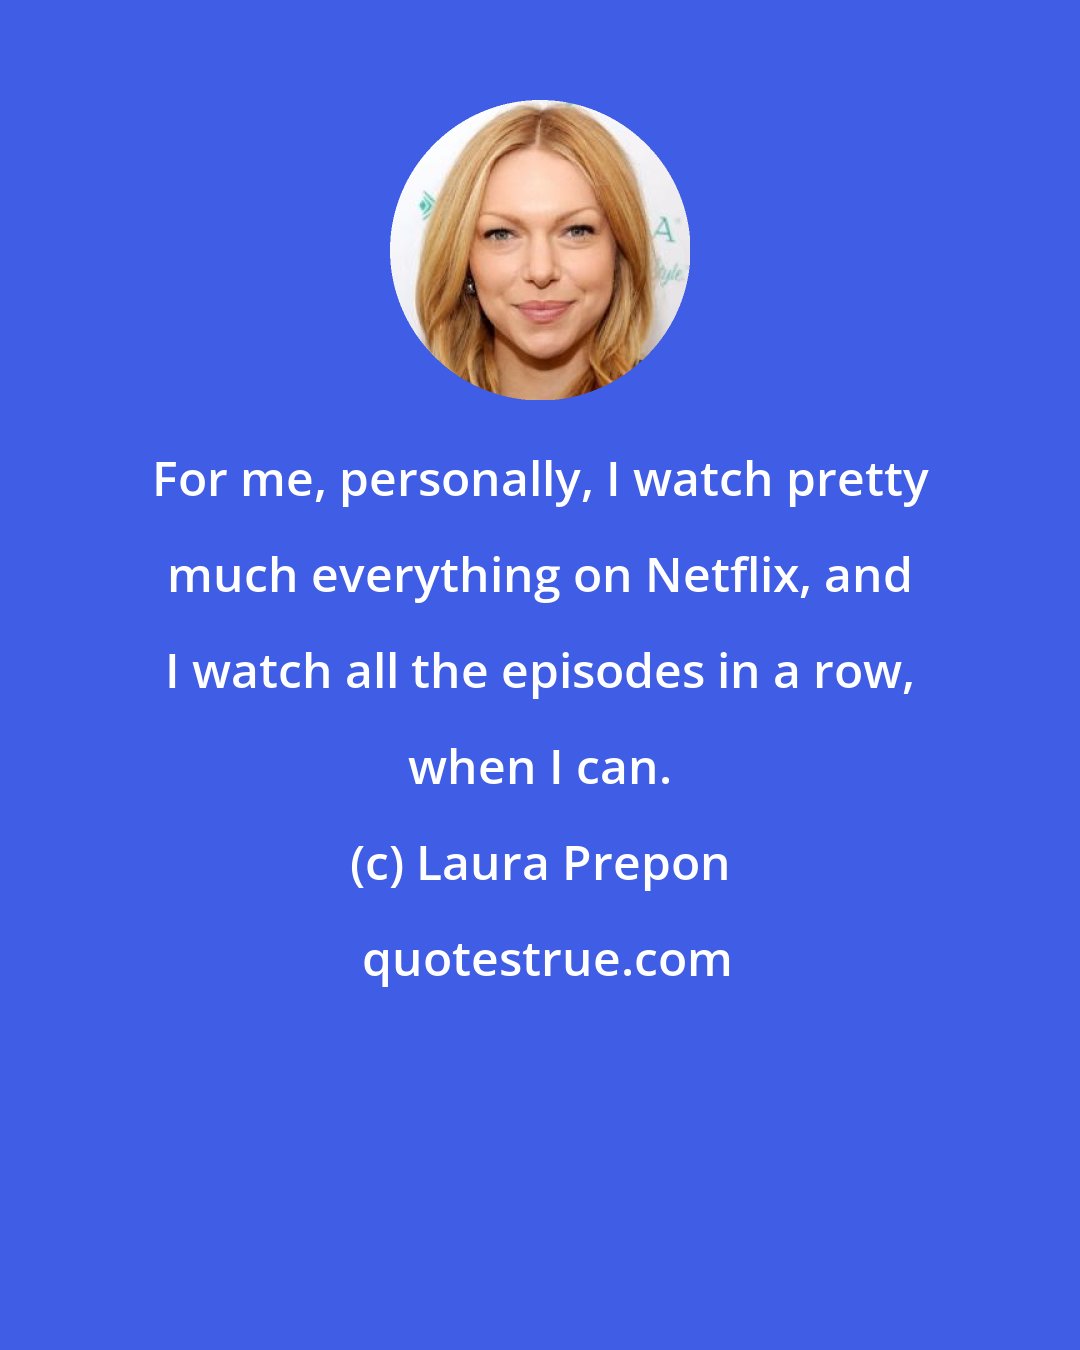 Laura Prepon: For me, personally, I watch pretty much everything on Netflix, and I watch all the episodes in a row, when I can.